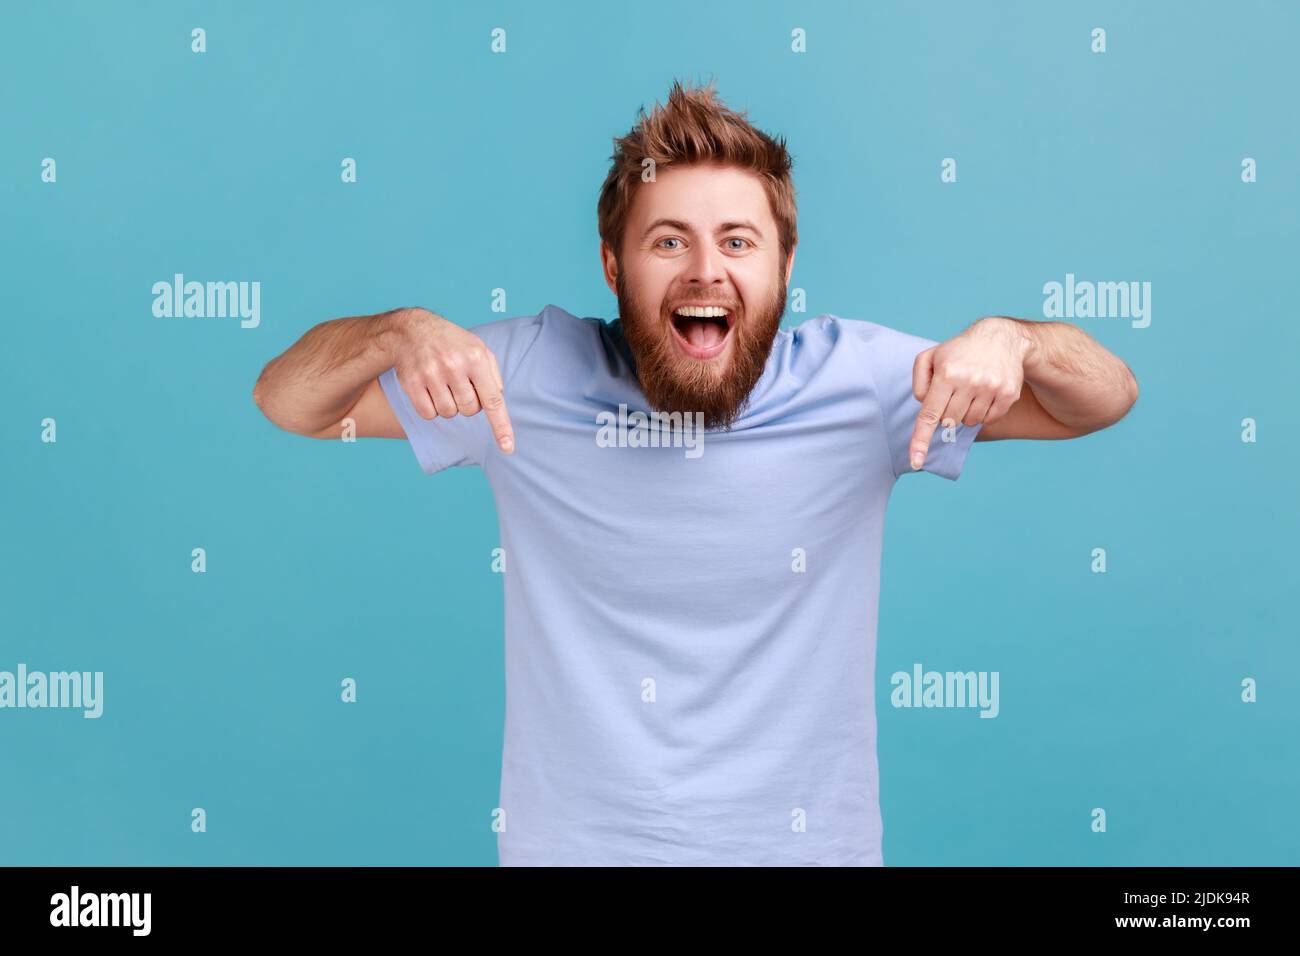 Portrait of happy satisfied bearded man pointing down and looking at camera, showing place for idea presentation, expressing positive emotions. Indoor studio shot isolated on blue background. Stock Photo